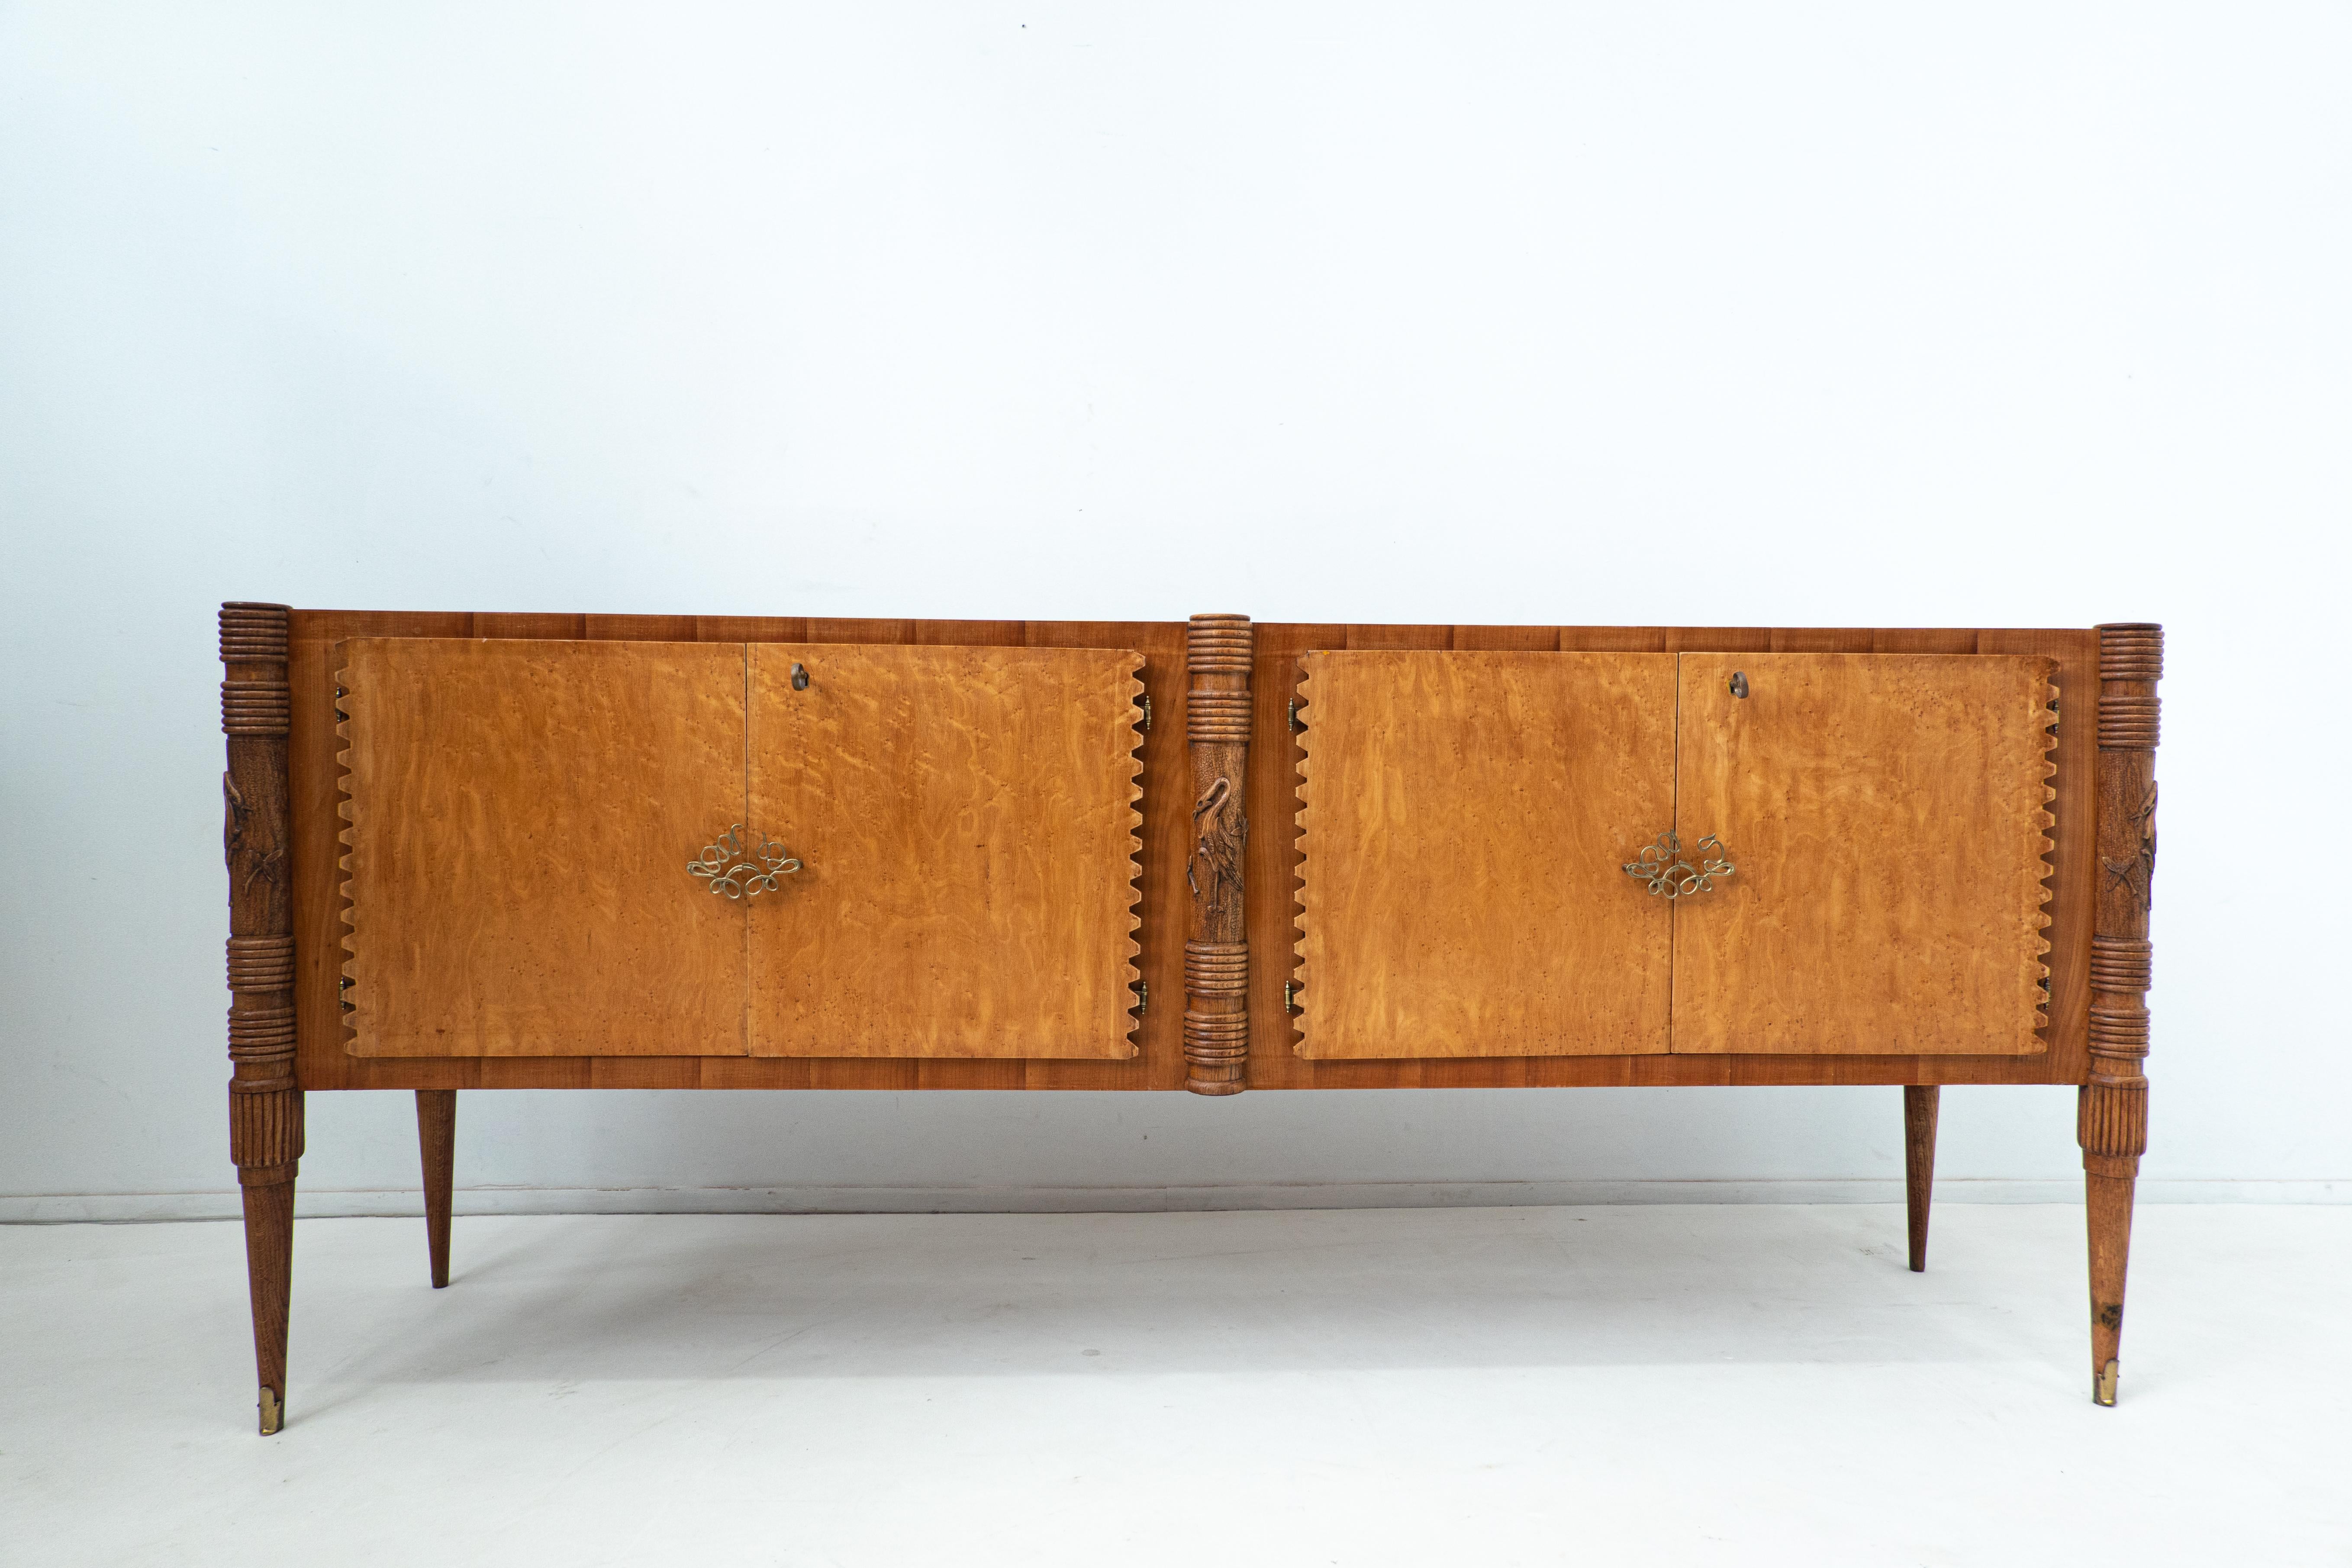 Large Italian Wooden Sideboard by Pier Luigi Colli with Four Doors, 1940s For Sale 4